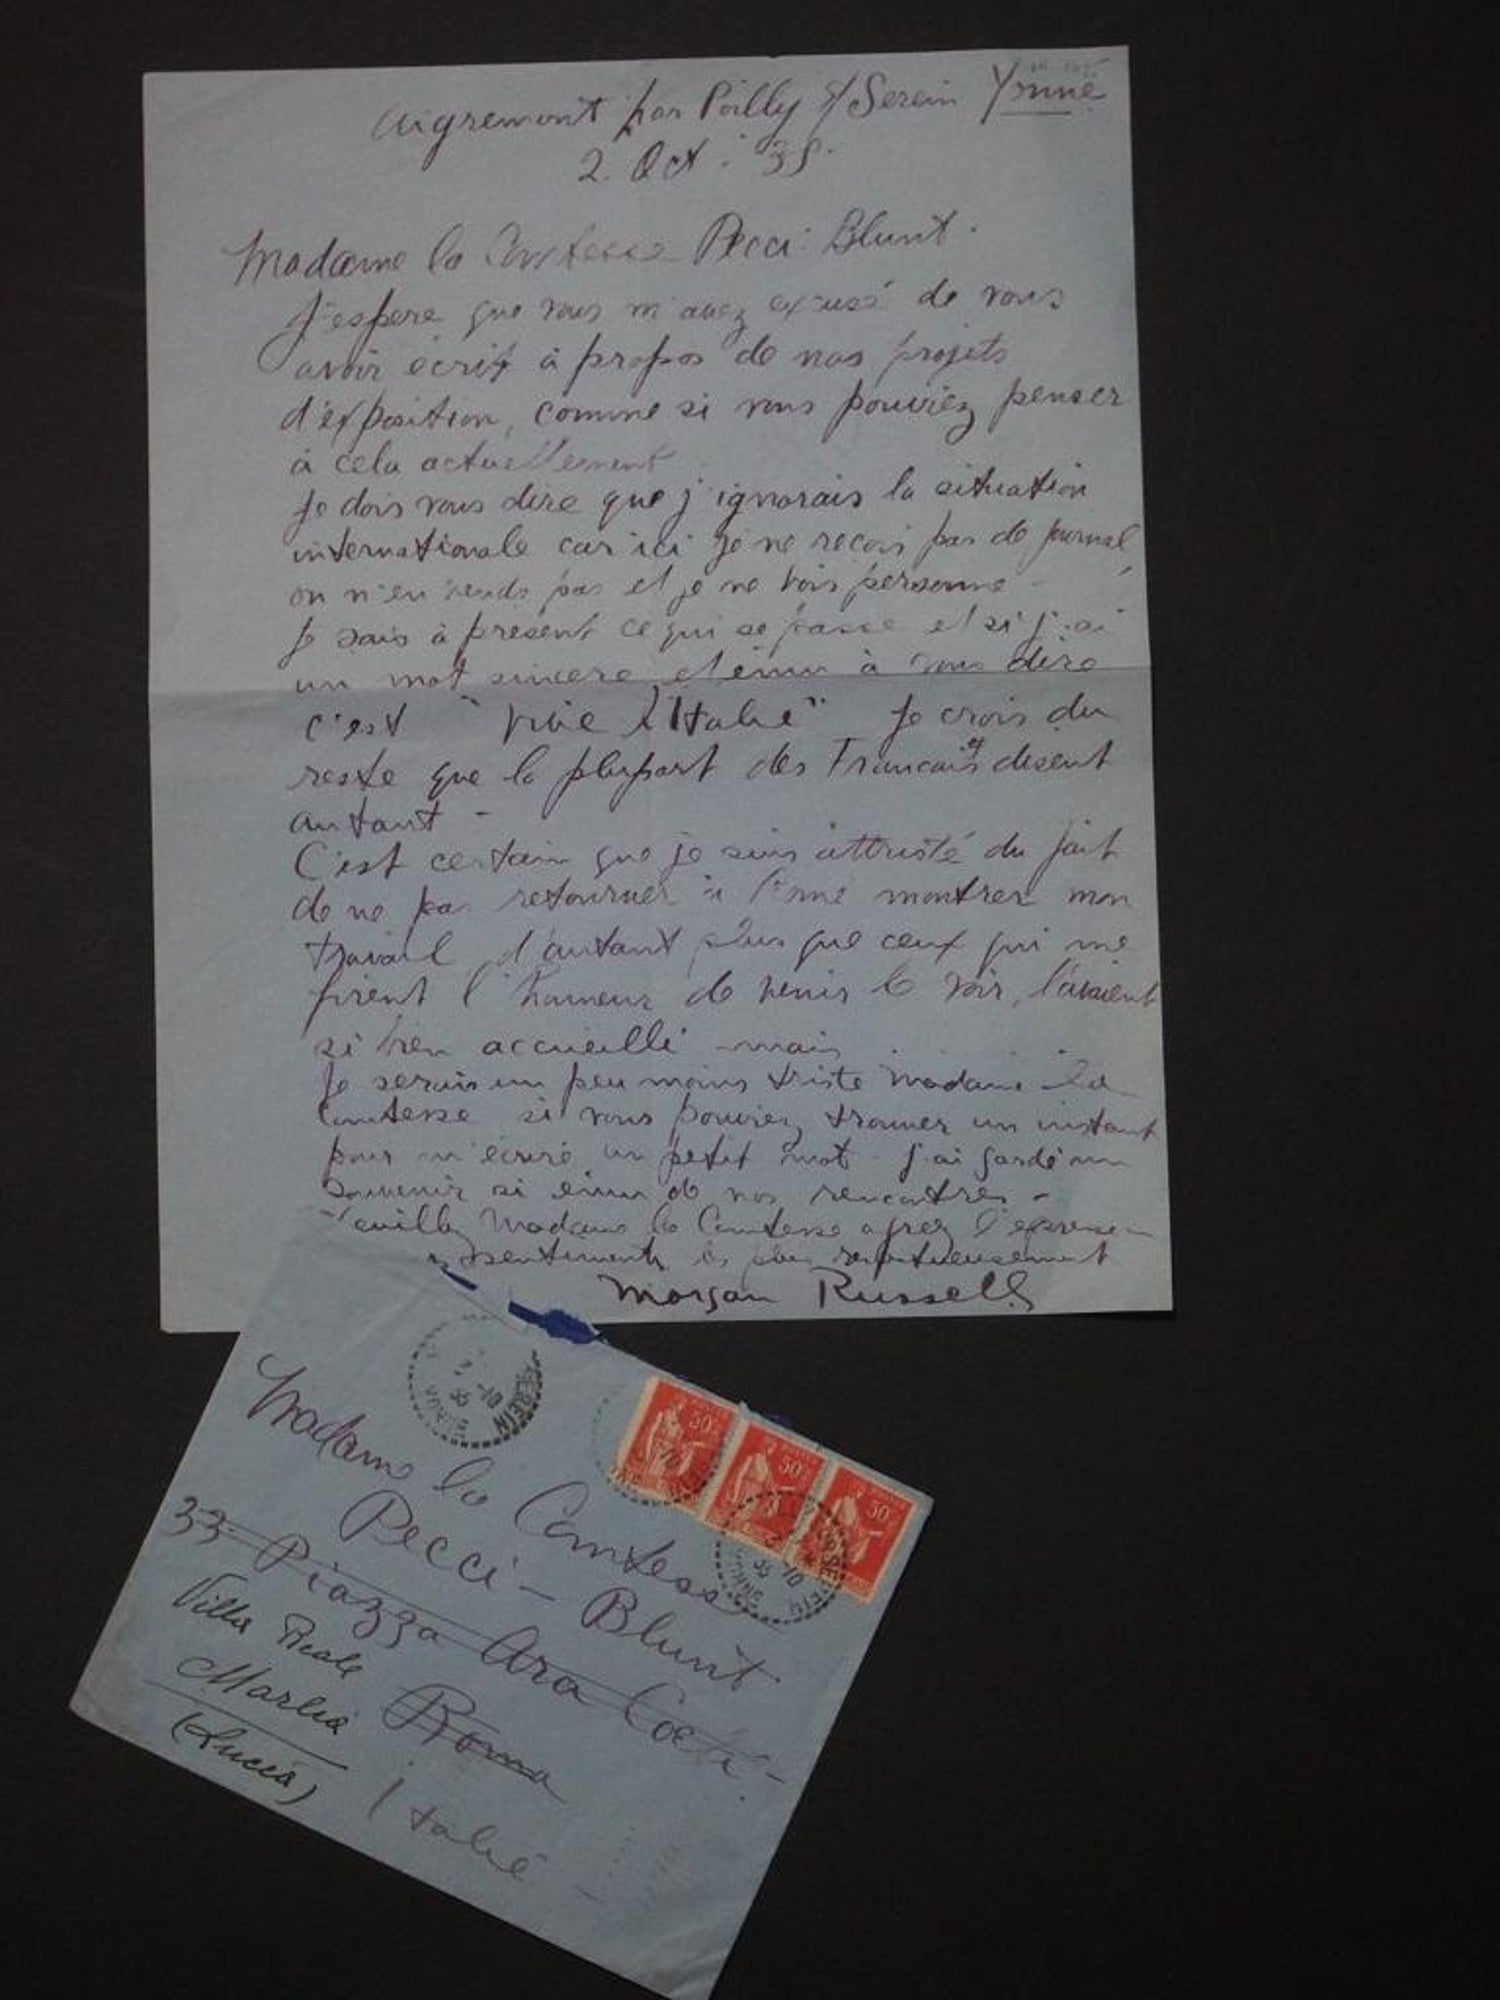 Morgan Russell - Vive l''Italie! - Autograph Letter Signed by Morgan  Russell - 1935 For Sale at 1stDibs